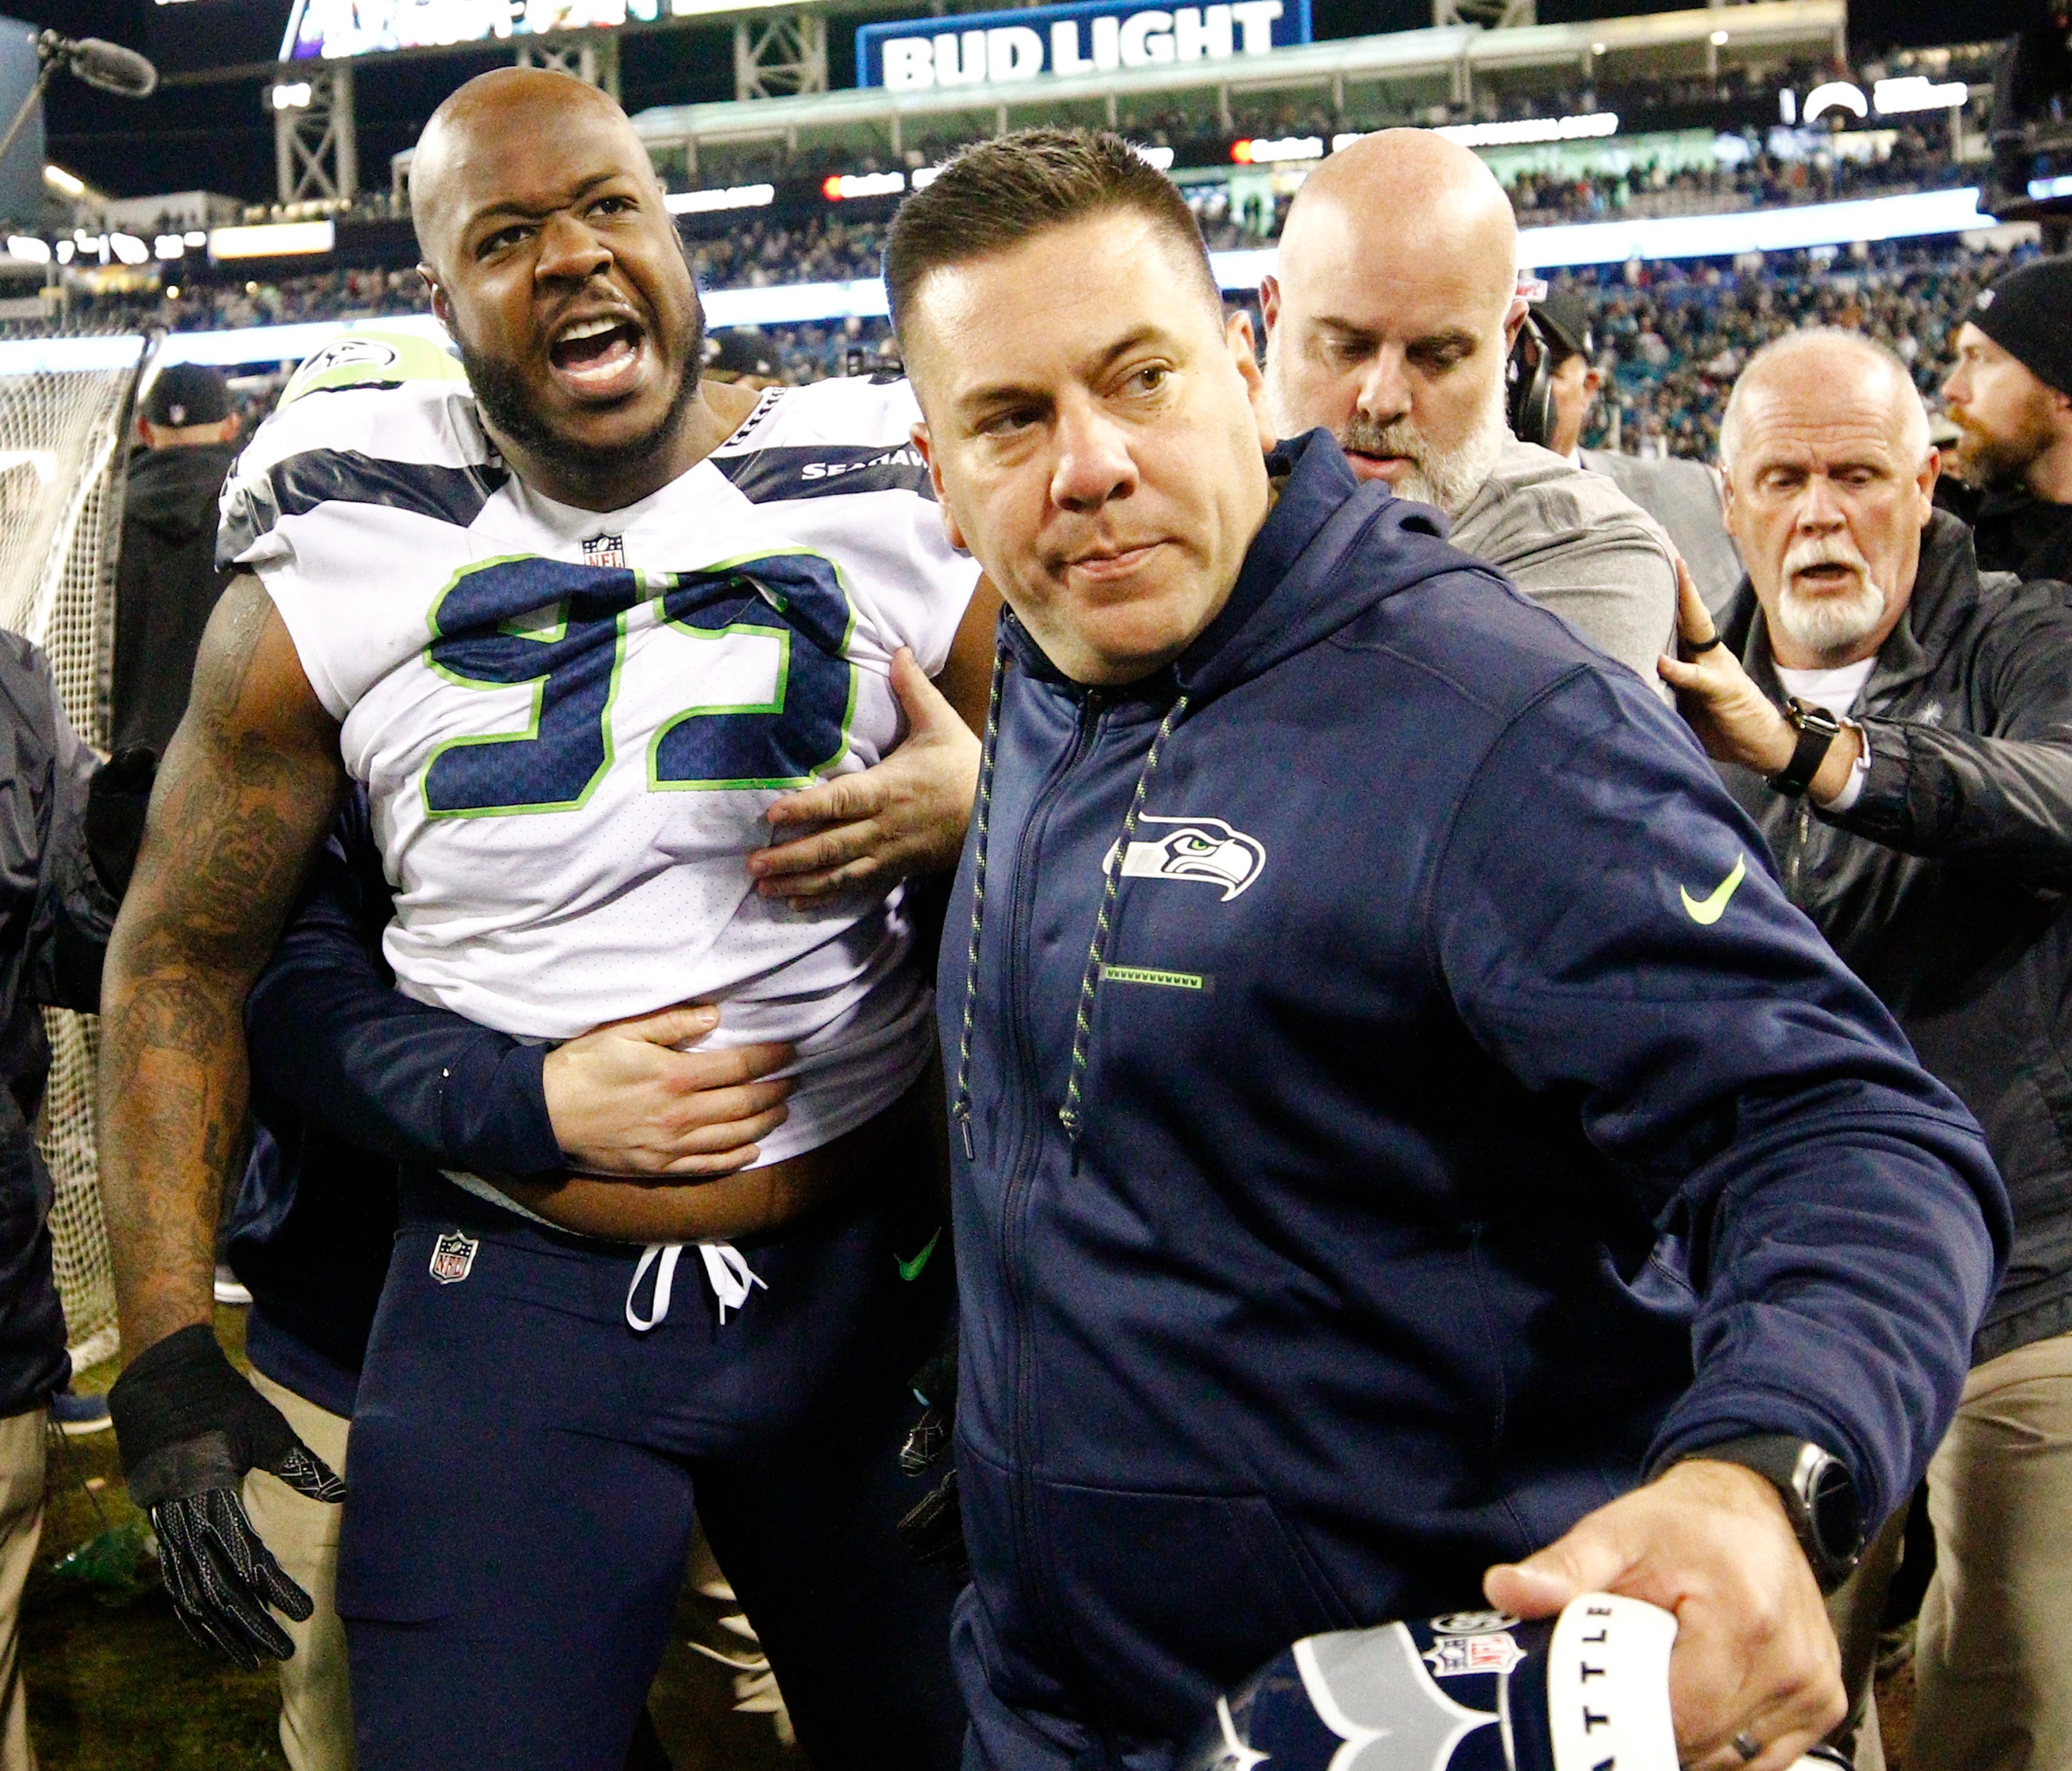 Members of the Seattle Seahawks staff escort Seattle Seahawks defensive tackle Quinton Jefferson (99) off the field after he got into a shouting match with fans when objects were thrown at him after an NFL football game against the Jacksonville Jagua